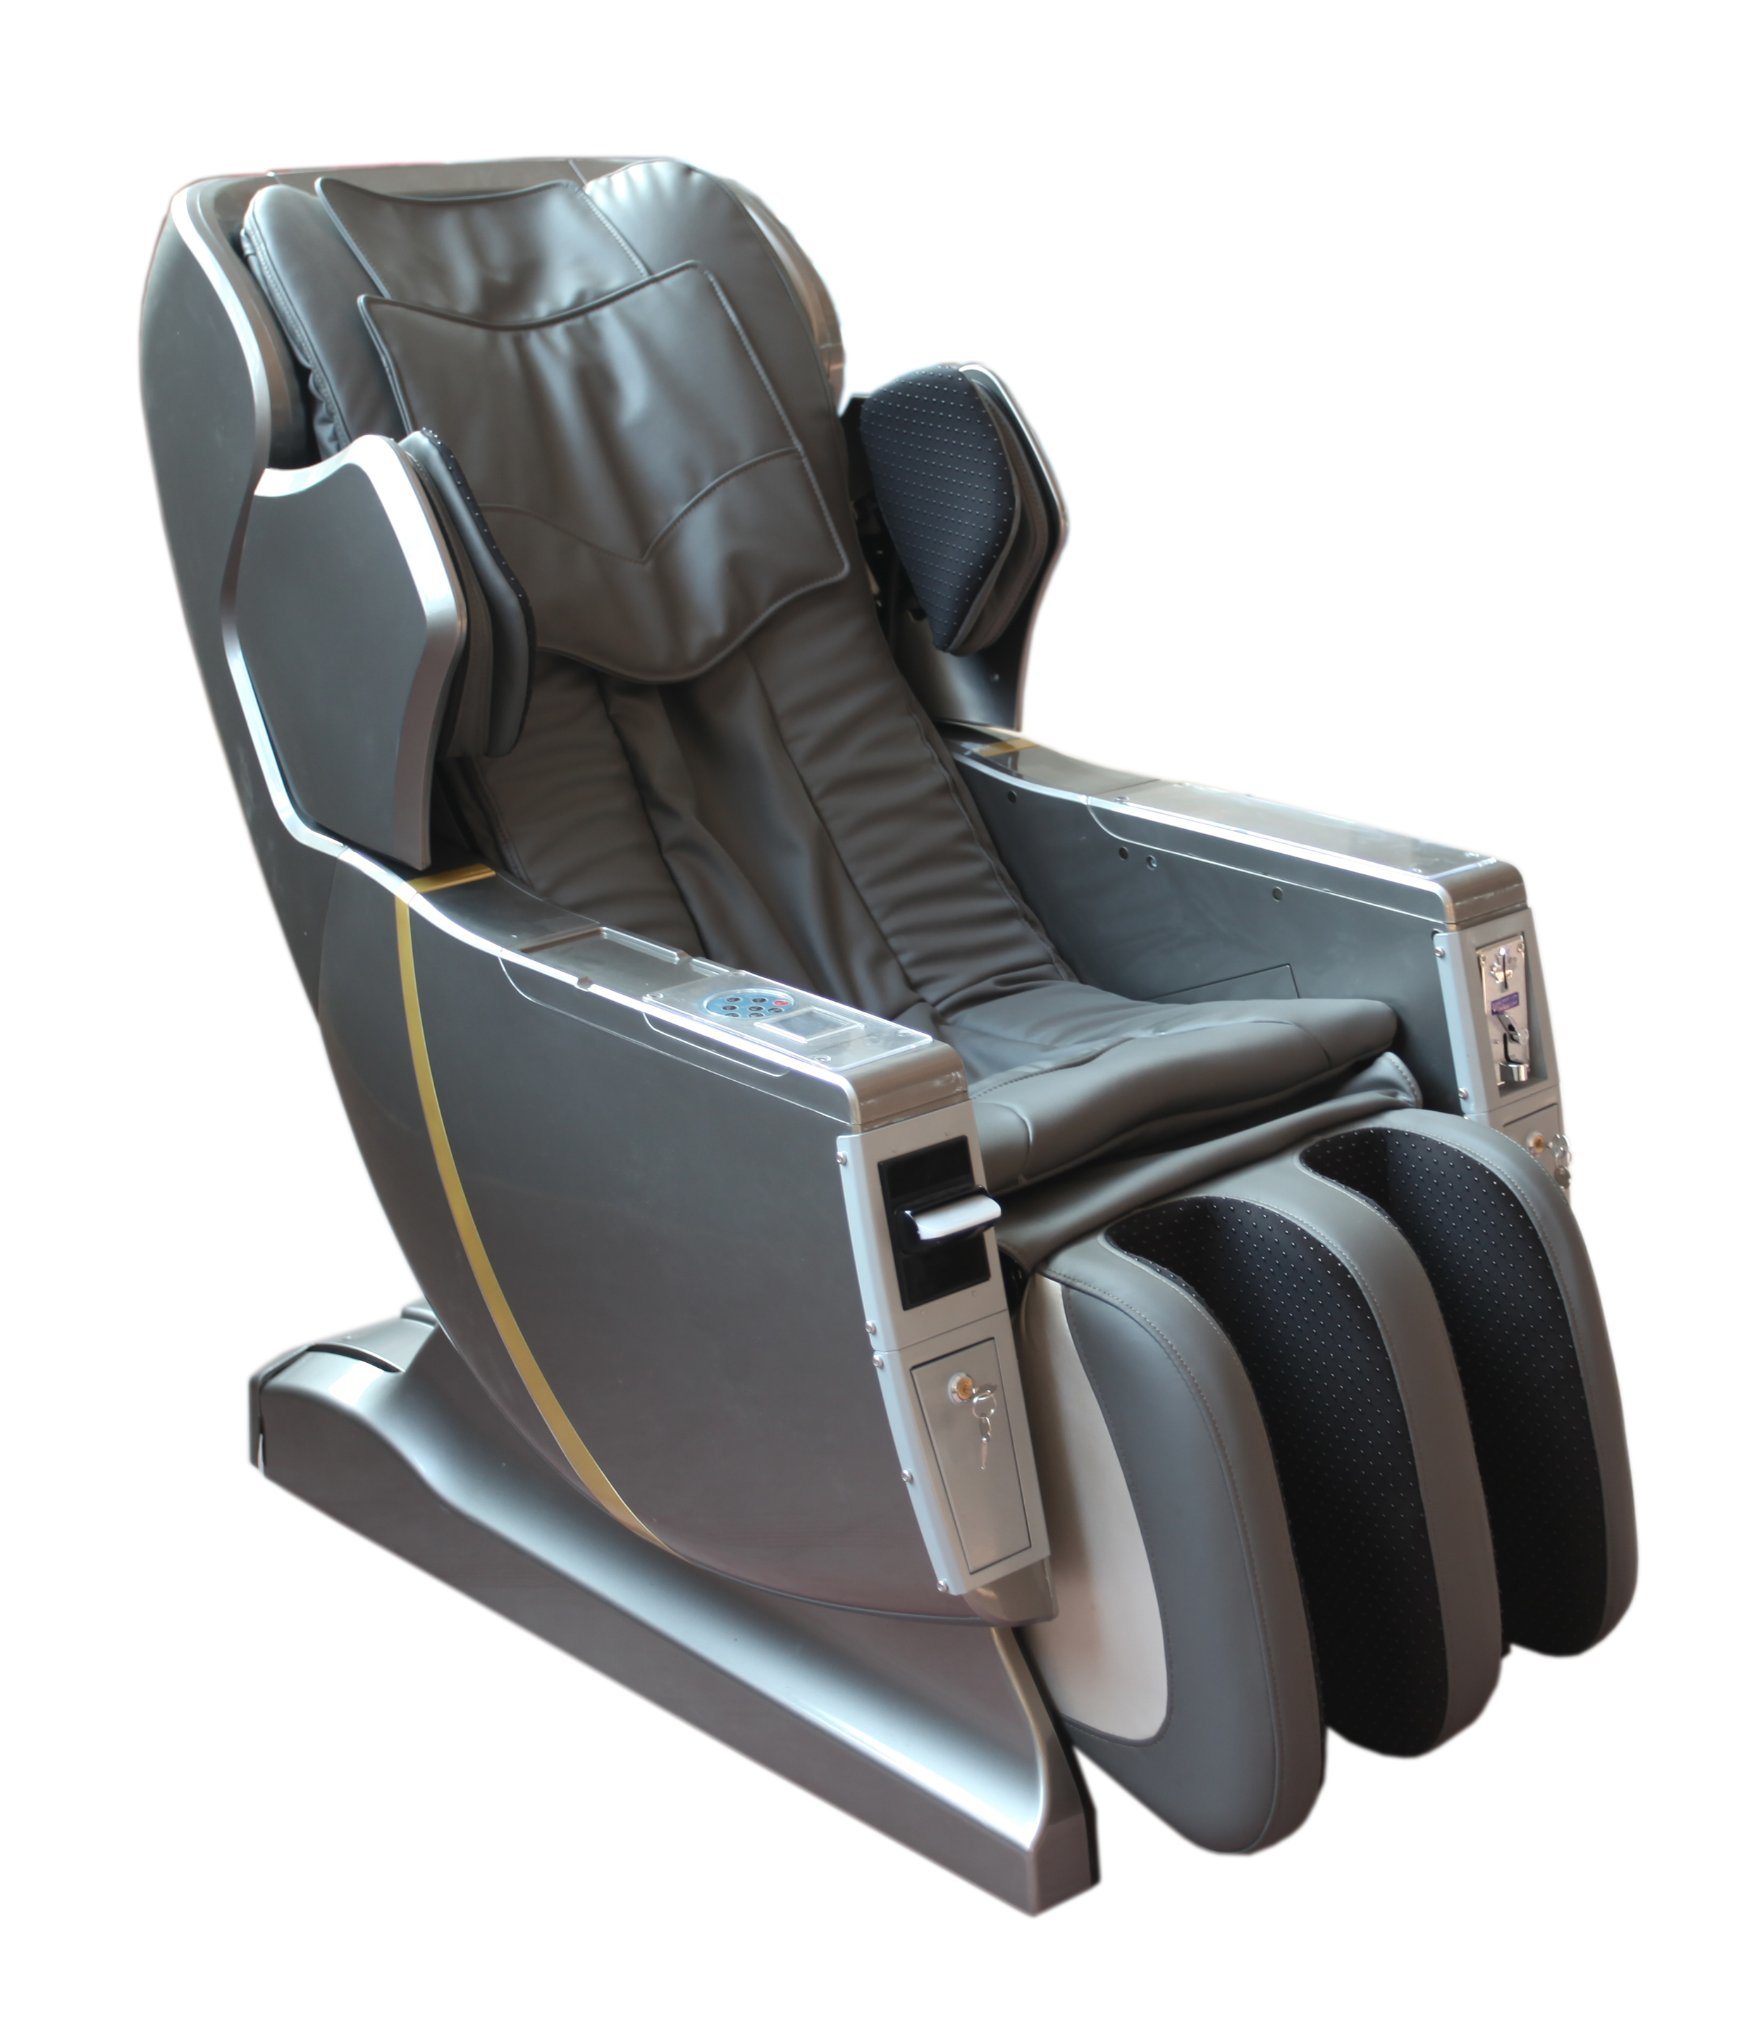 New Model Coin & Bill Operated Vending Massage Chair